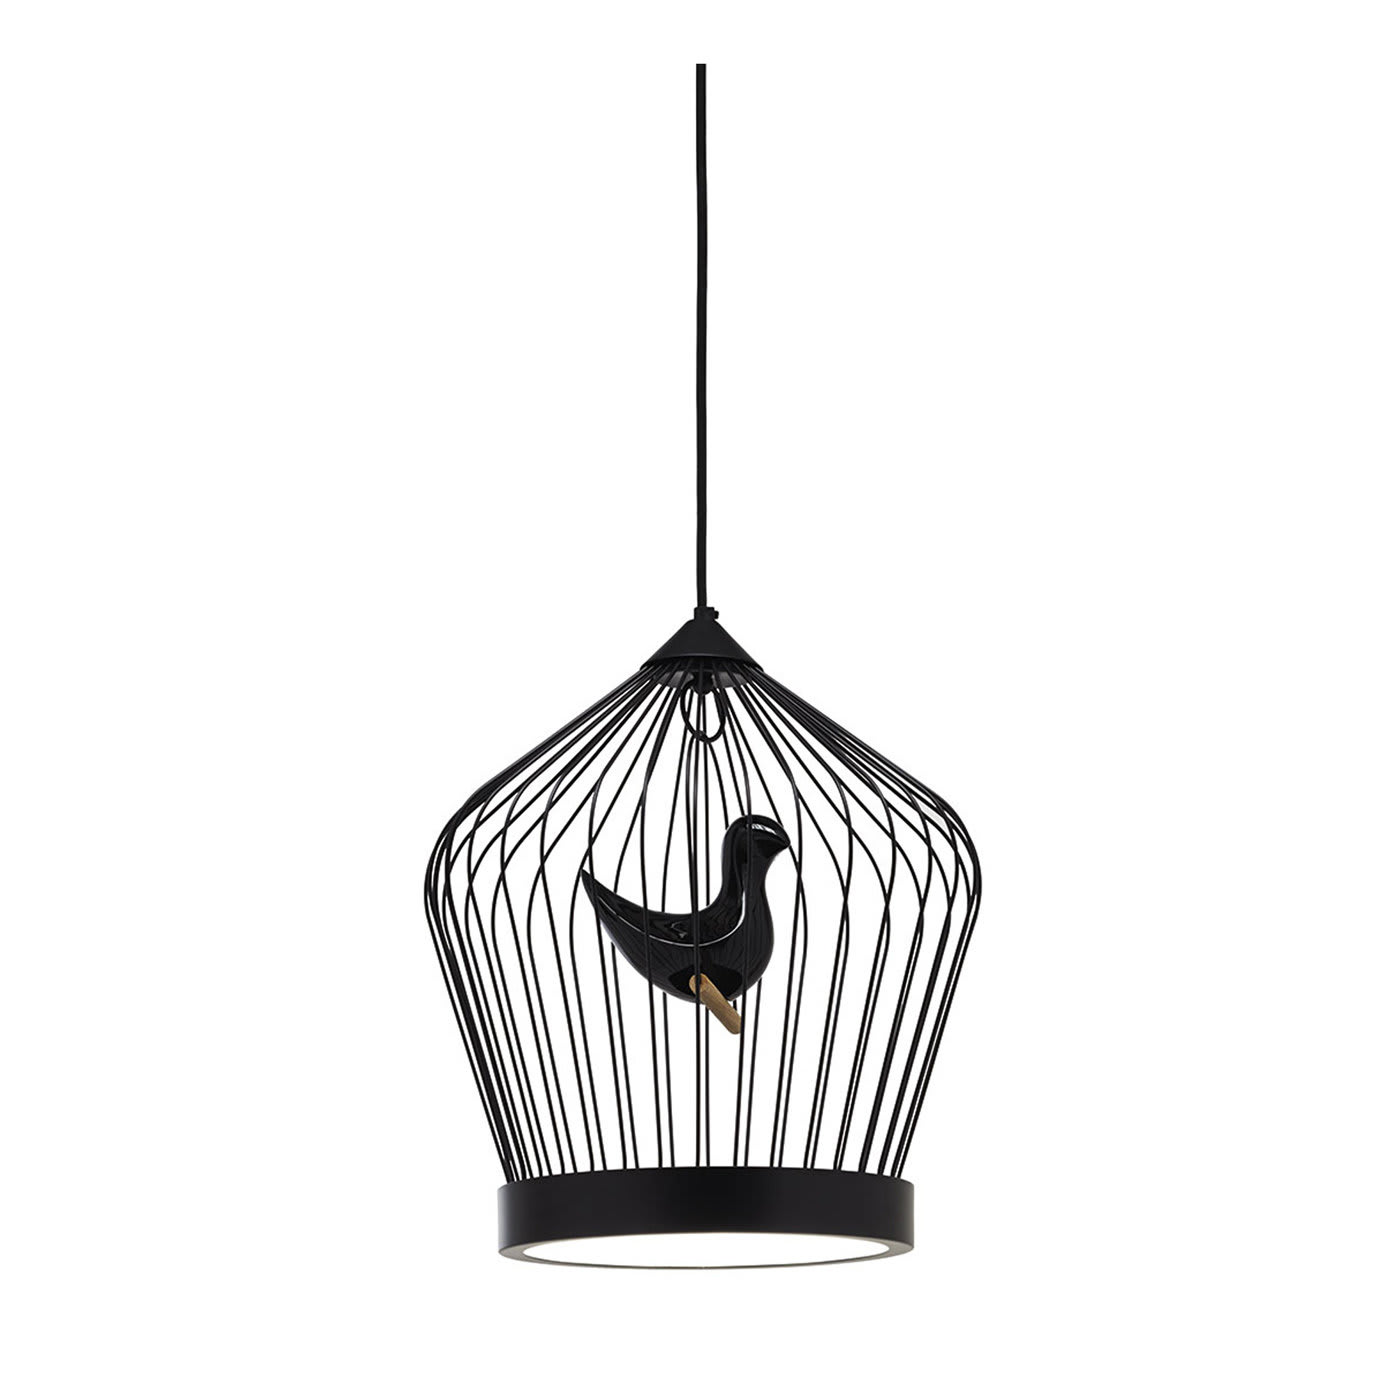 Twee T. Black Small Suspension Lamp by Jake Phipps  - Casamania